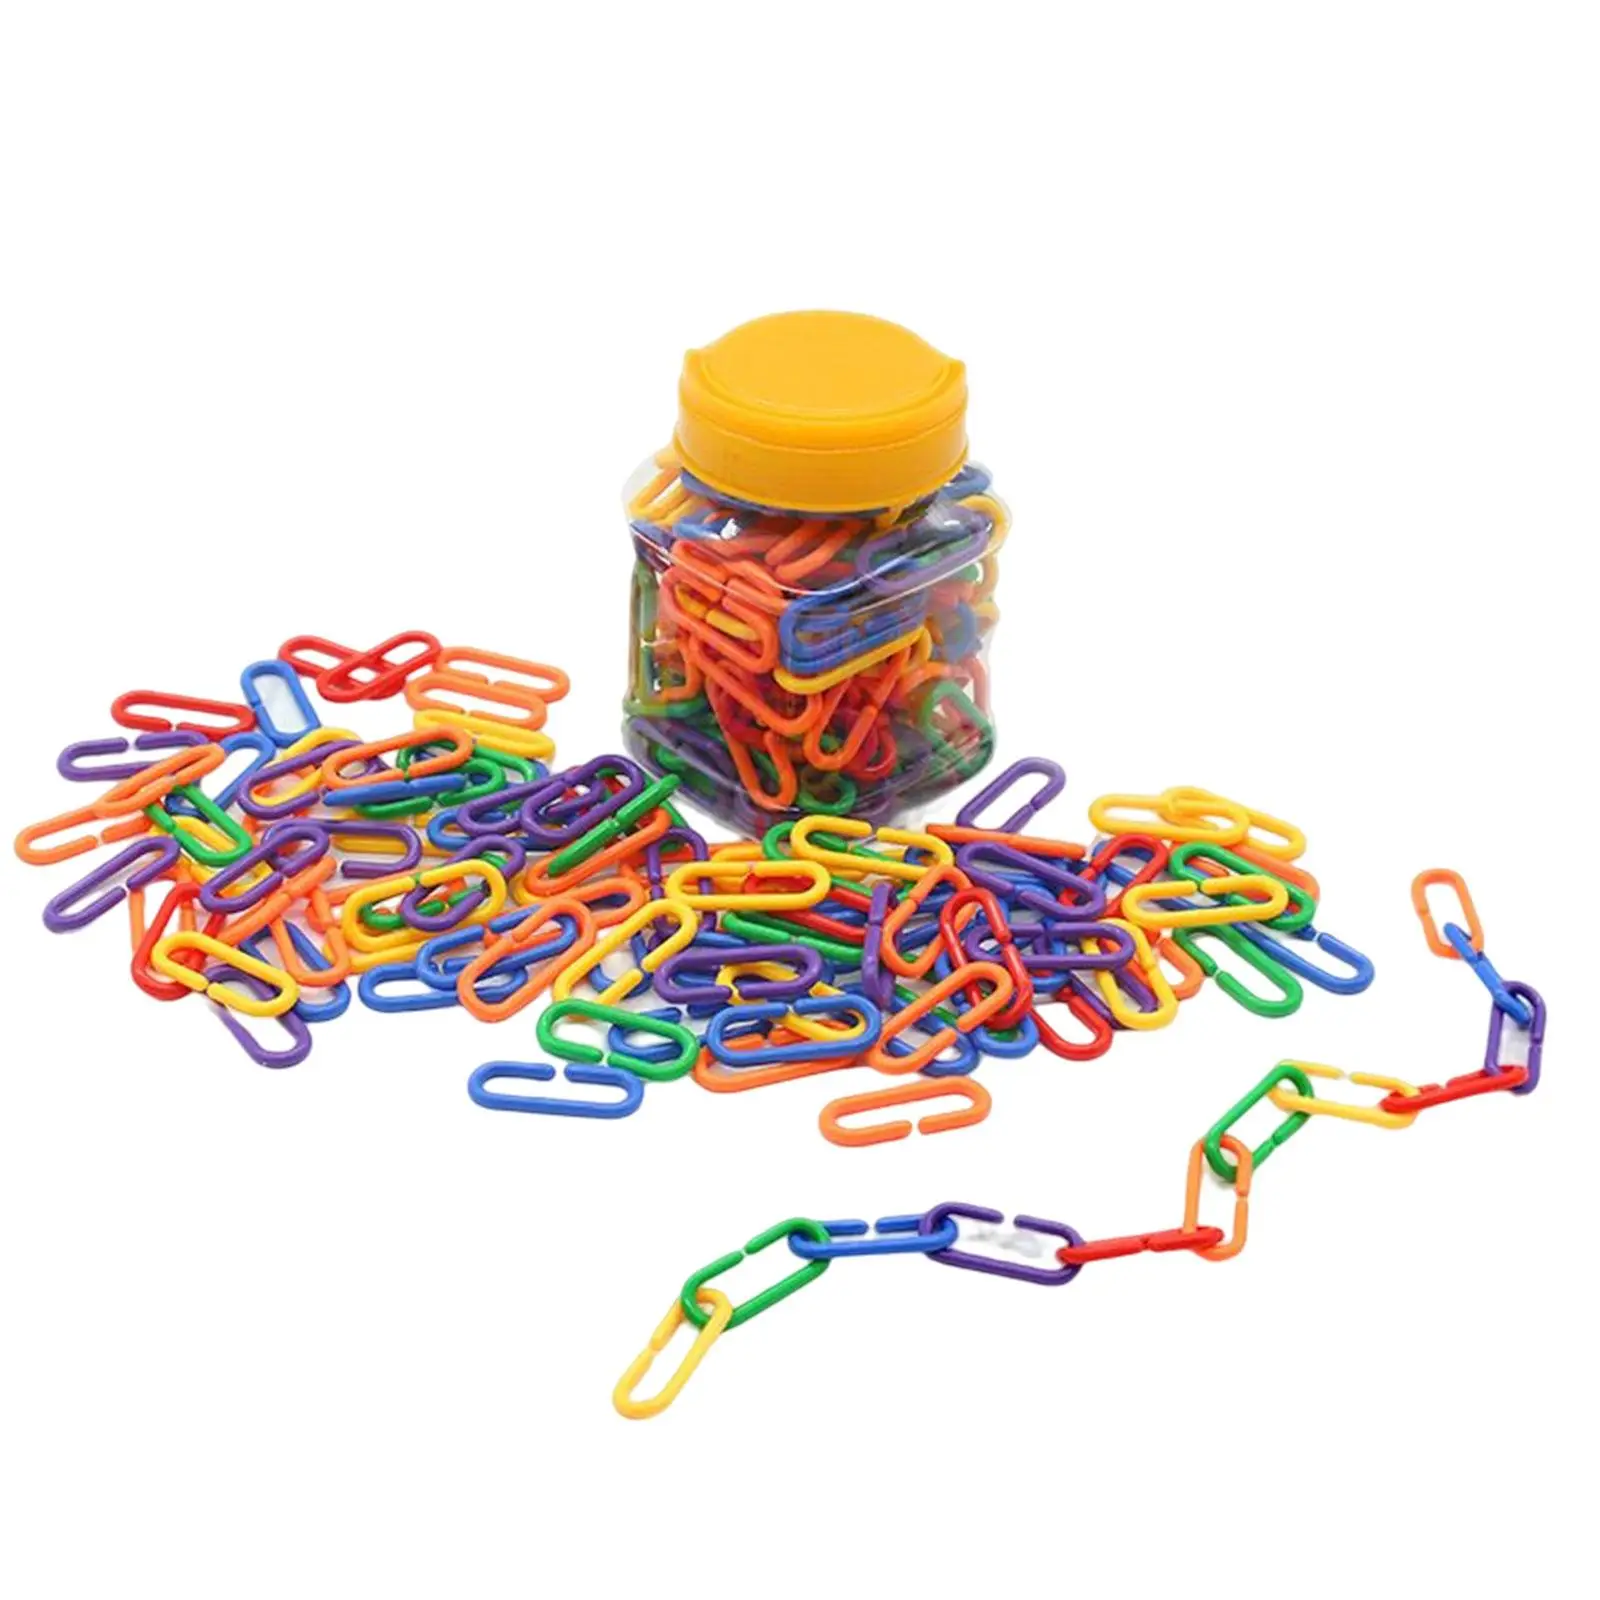 360Pcs Rainbow Color Hook Links Connected Buckle Educational Toy